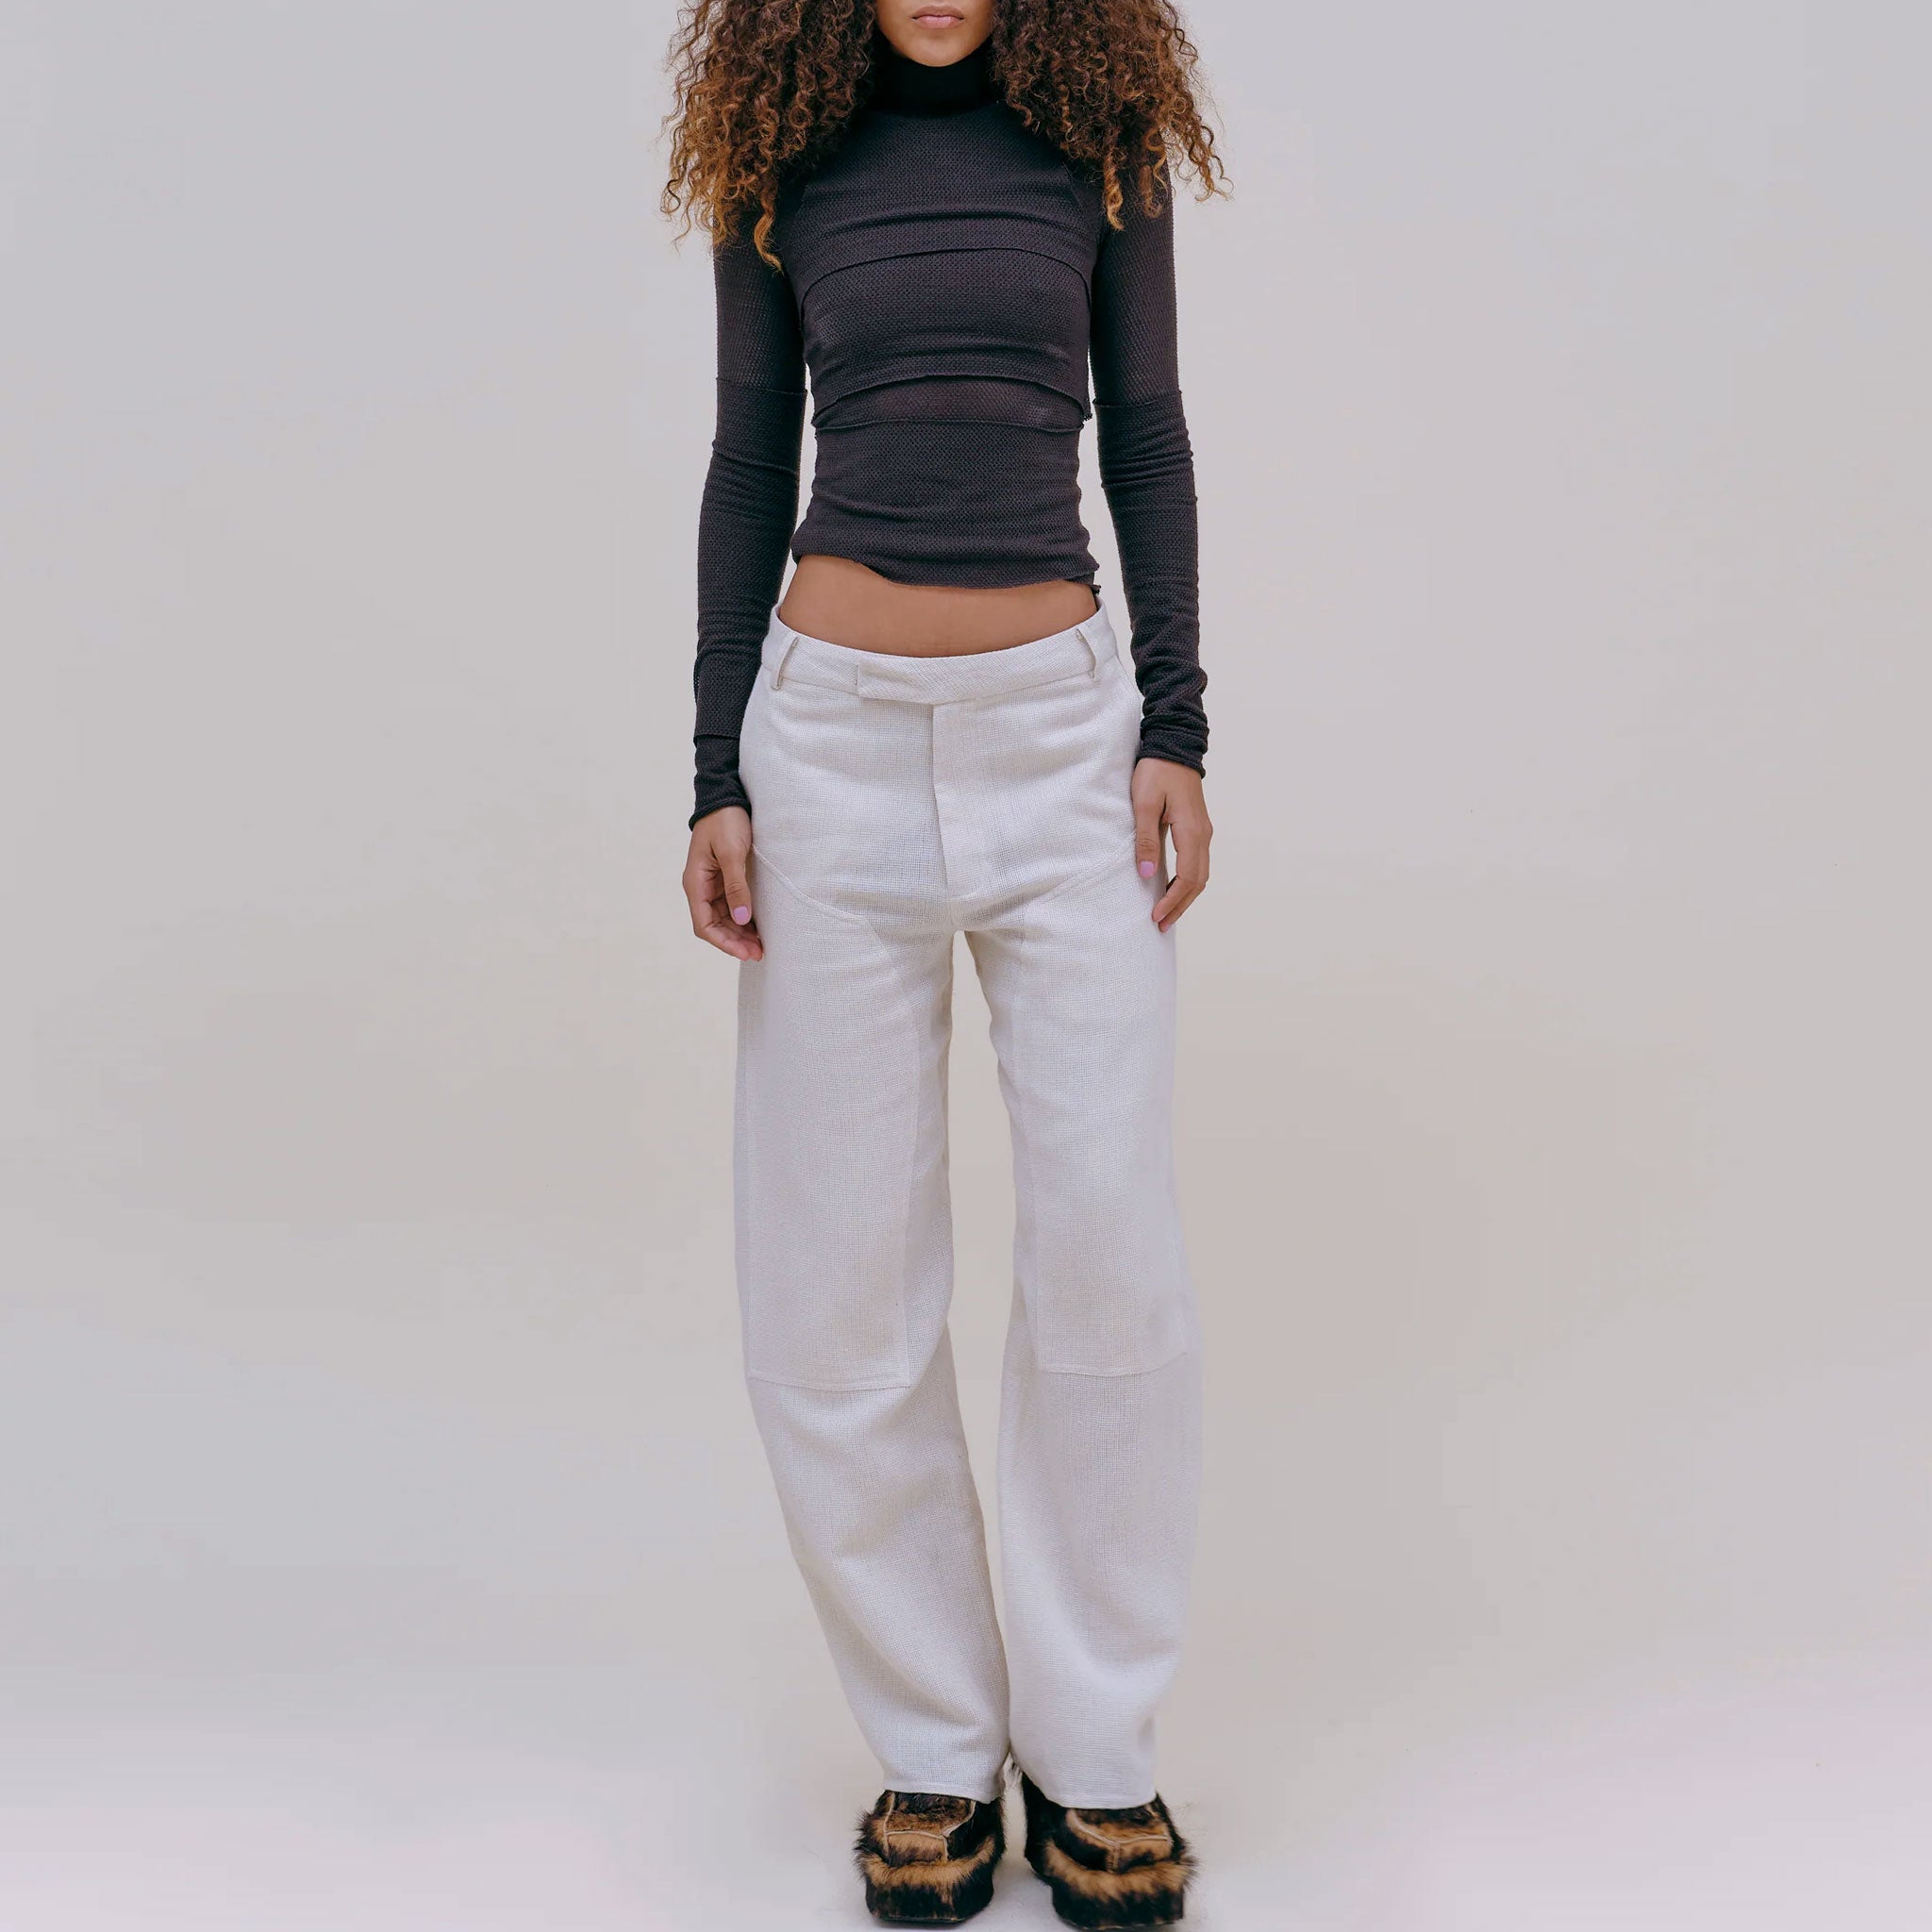 Full body photo of model wearing the Linen Pant - Natural.